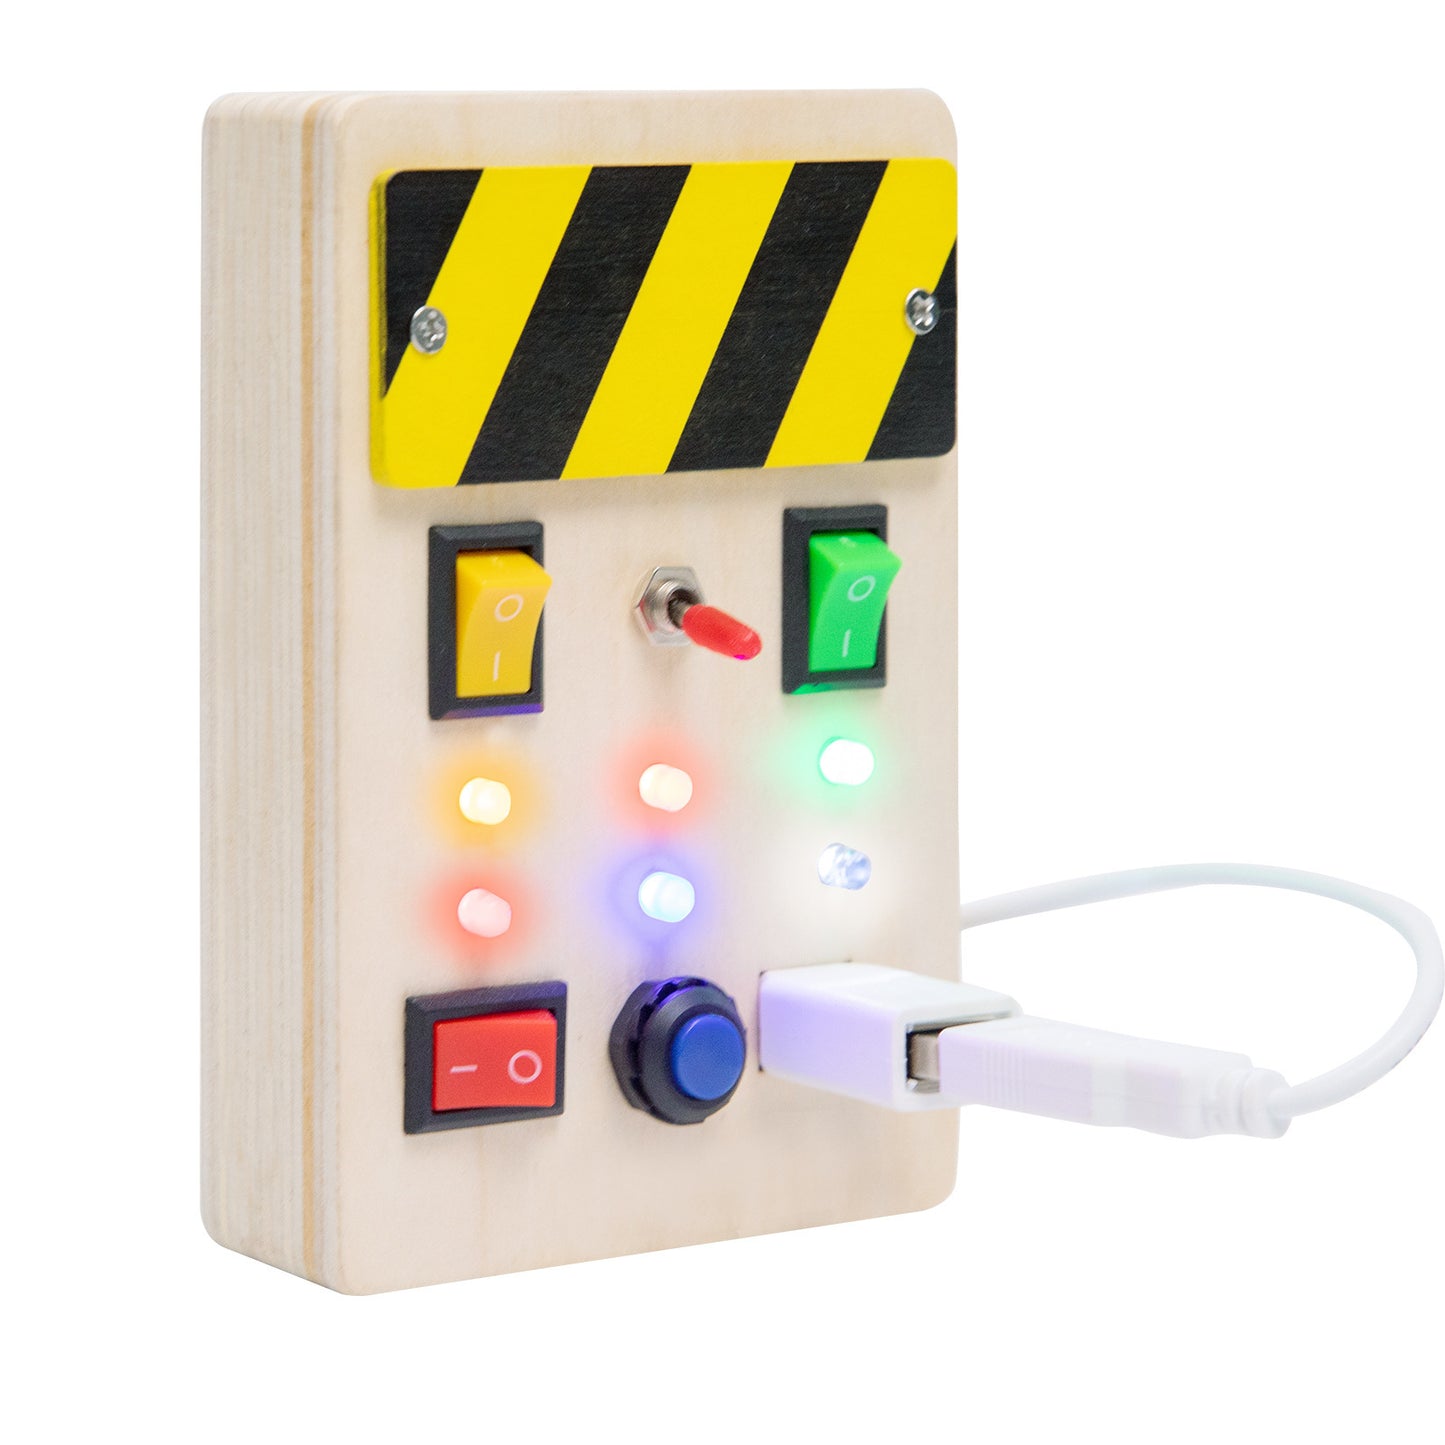 New Children's Early Education Toy Wooden Power LED Light Busy Board